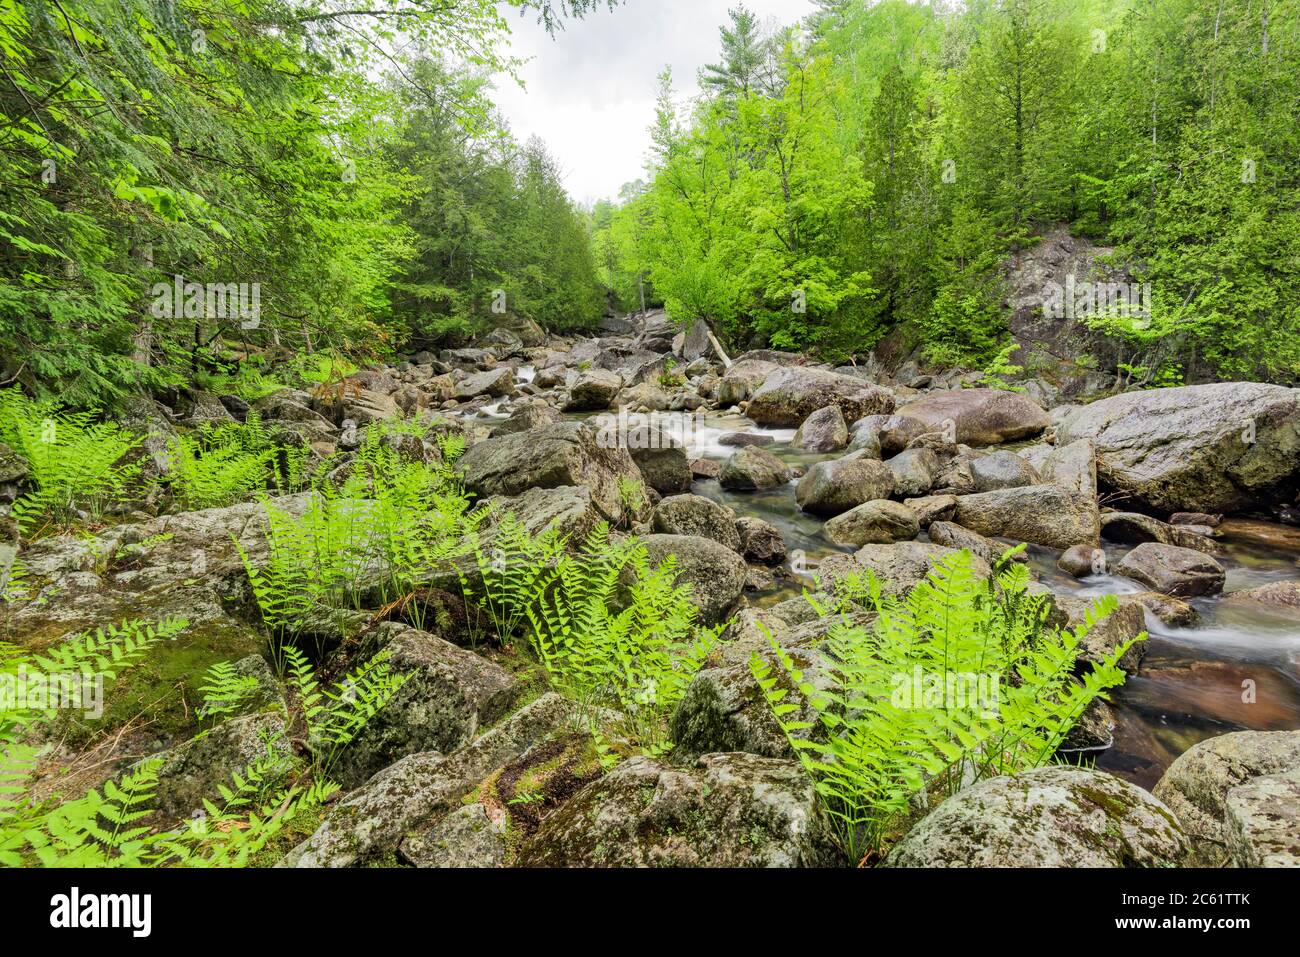 Rocks, ferns and new spring leaves on Boquet River, North Fork, Adirondack Wilderness, Adirondack Mtns., Essex County, New York Stock Photo